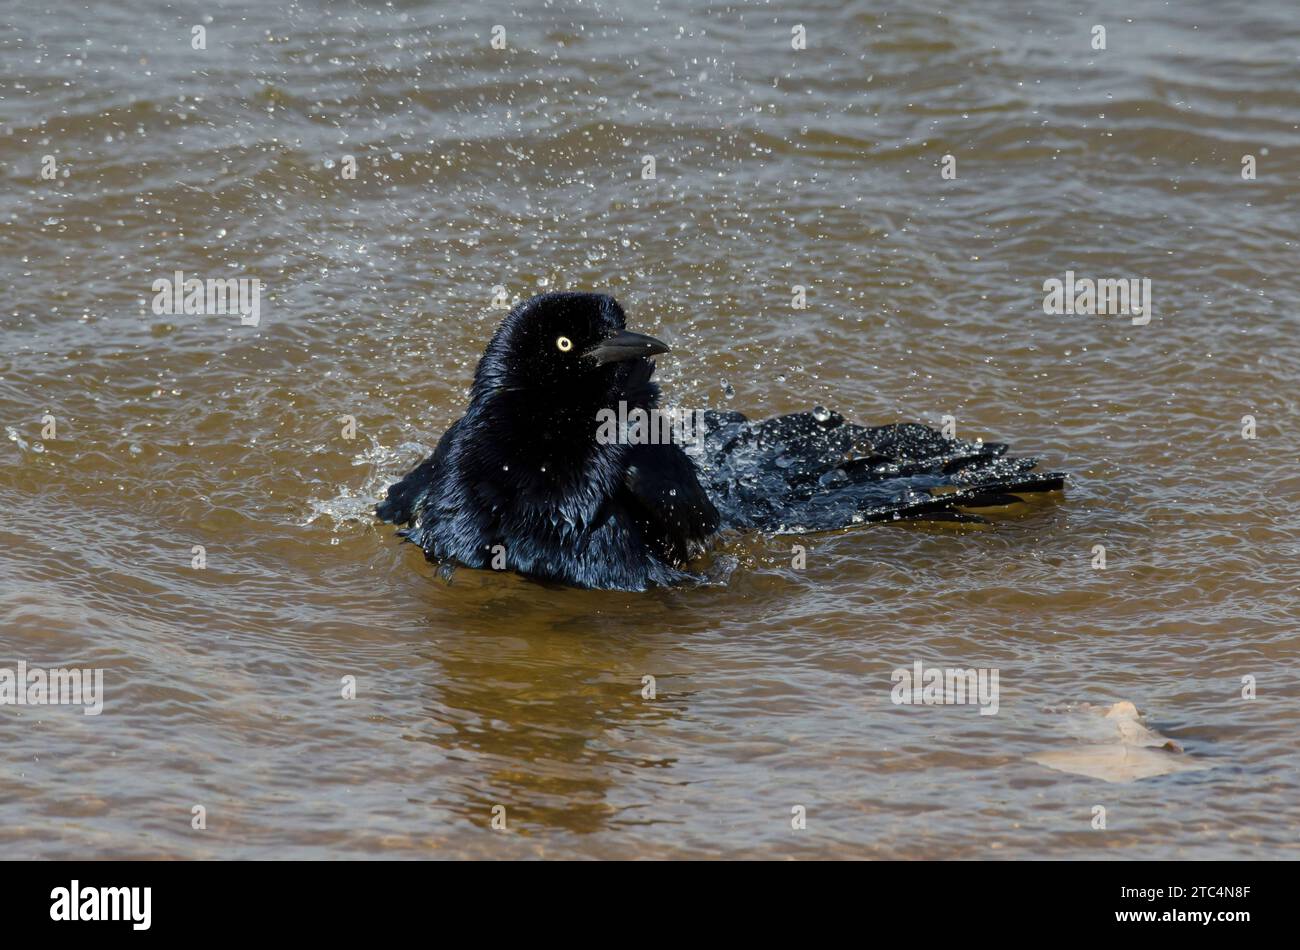 Great-tailed Grackle, Quiscalus mexicanus, male bathing along lakeshore Stock Photo